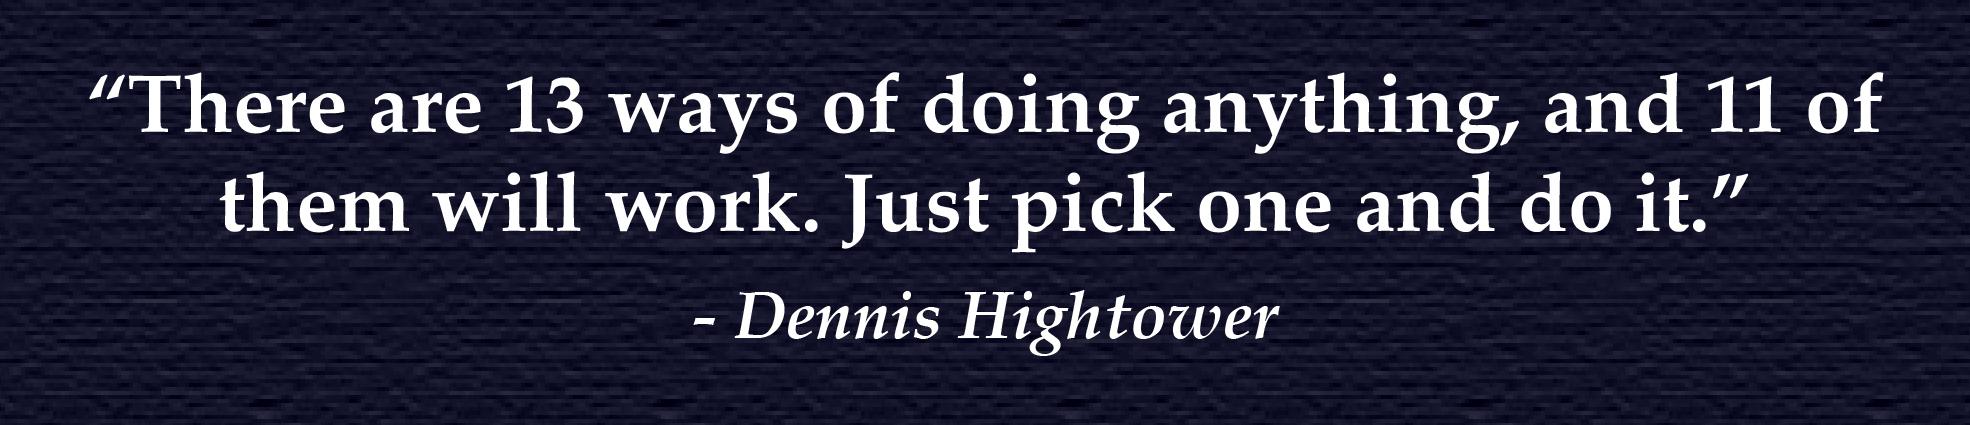 “There are 13 ways of doing anything, and 11 of them will work. Just pick one and do it.” - Dennis Hightower